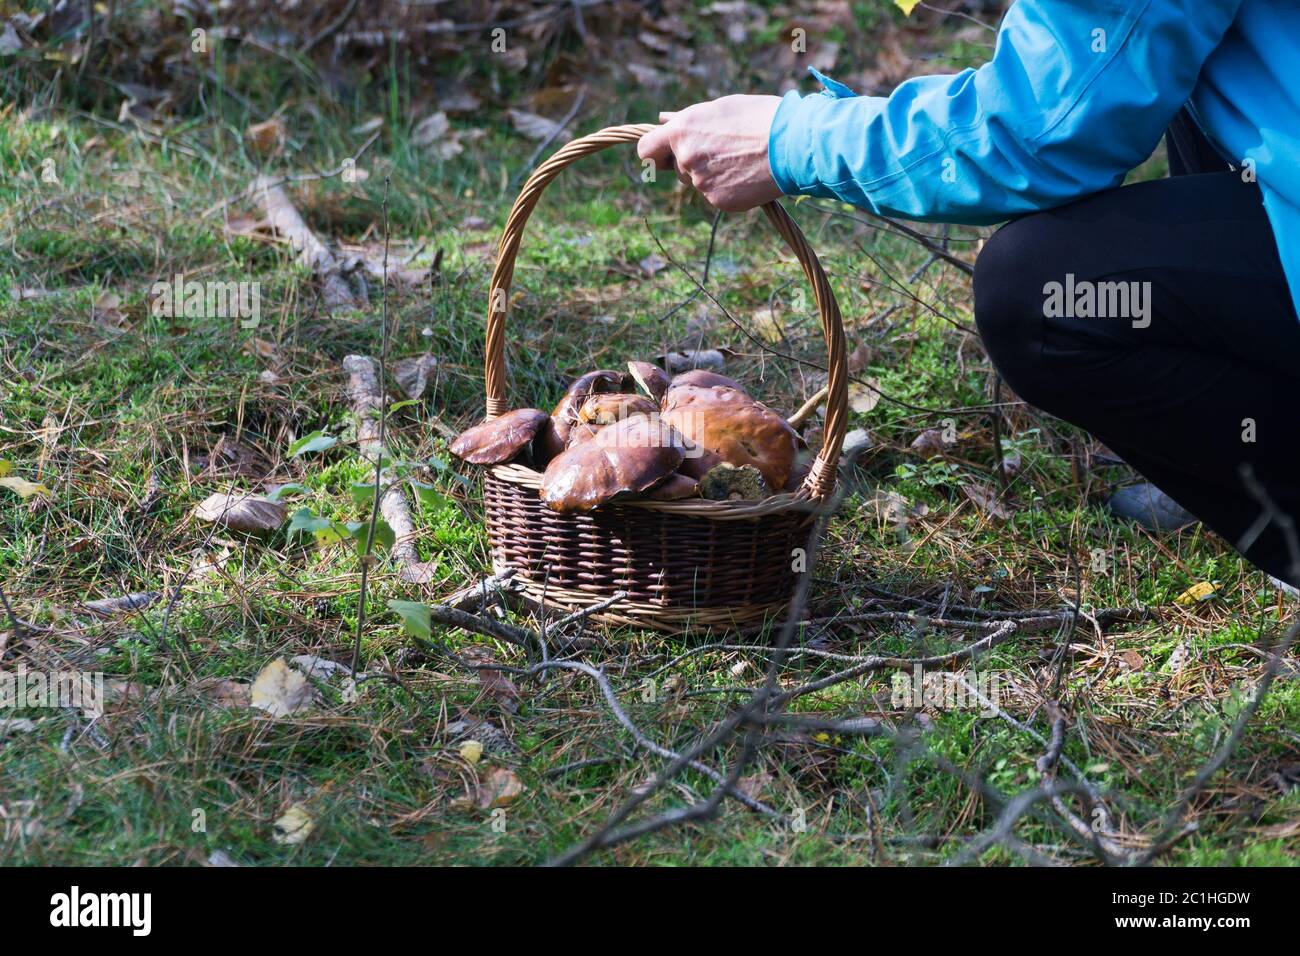 Woman picks wild mushrooms (bay boletes) in the autumn forest into a wicker basket. Stock Photo